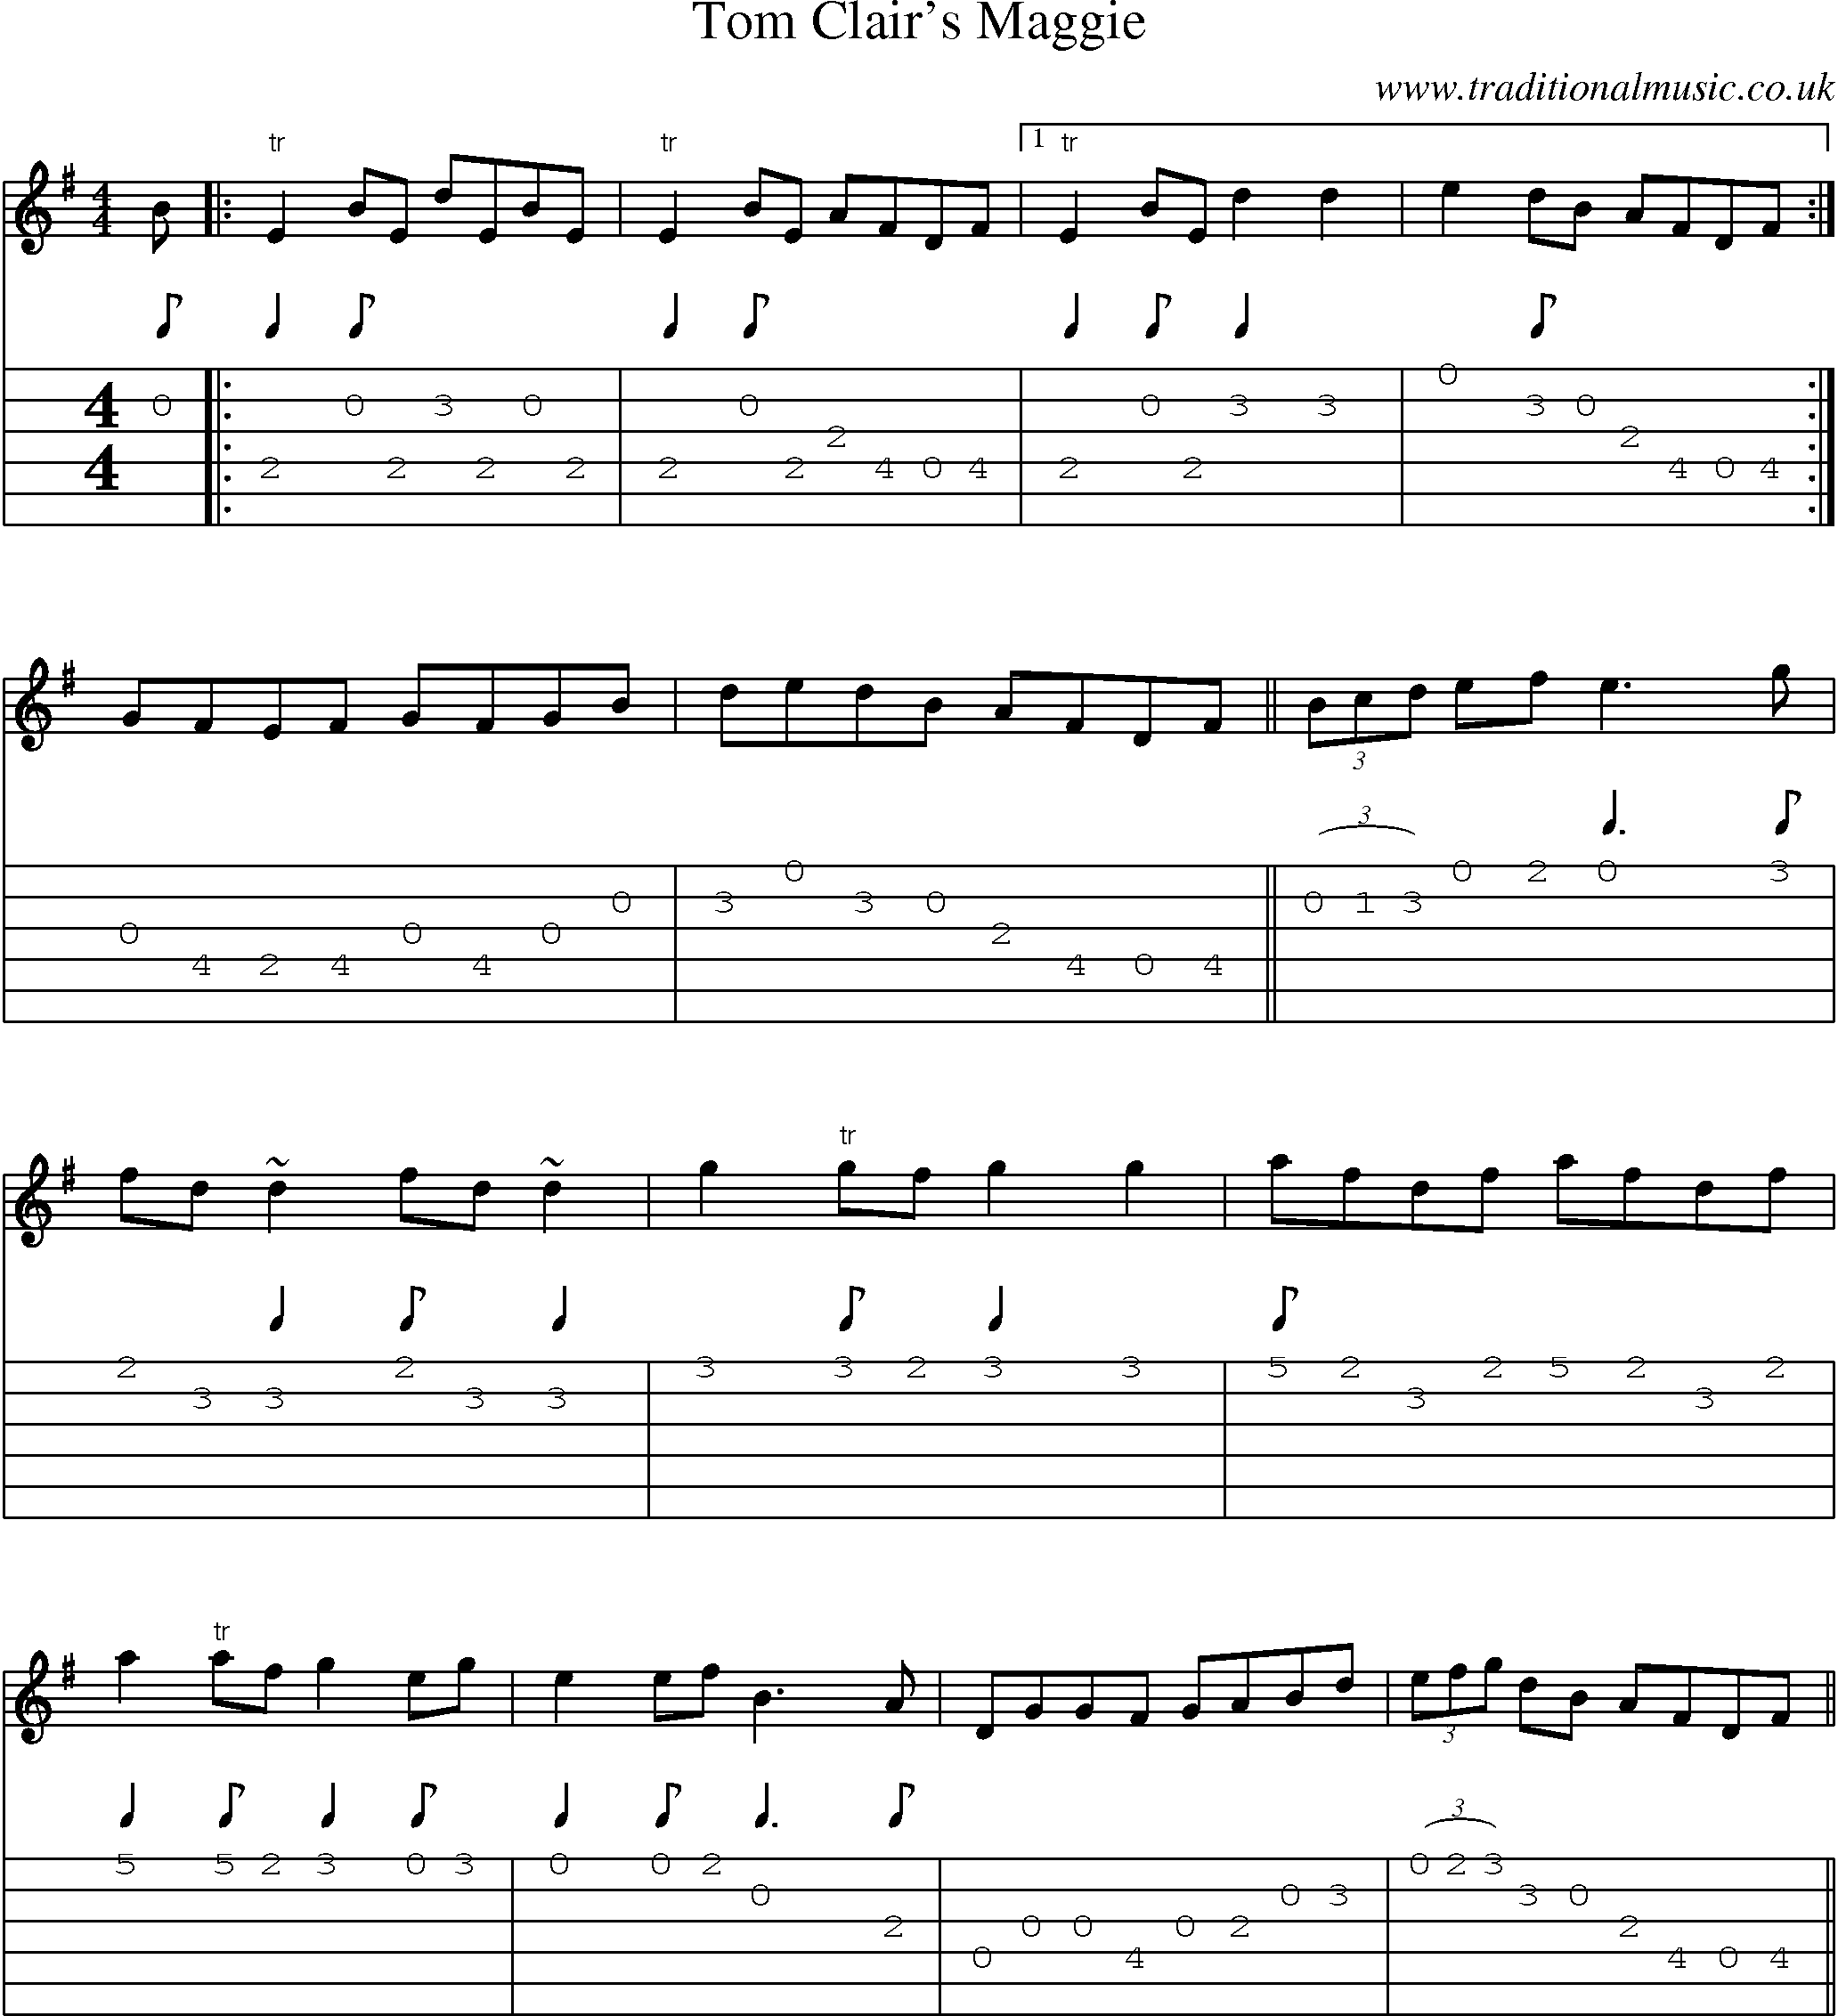 Music Score and Guitar Tabs for Tom Clairs Maggie